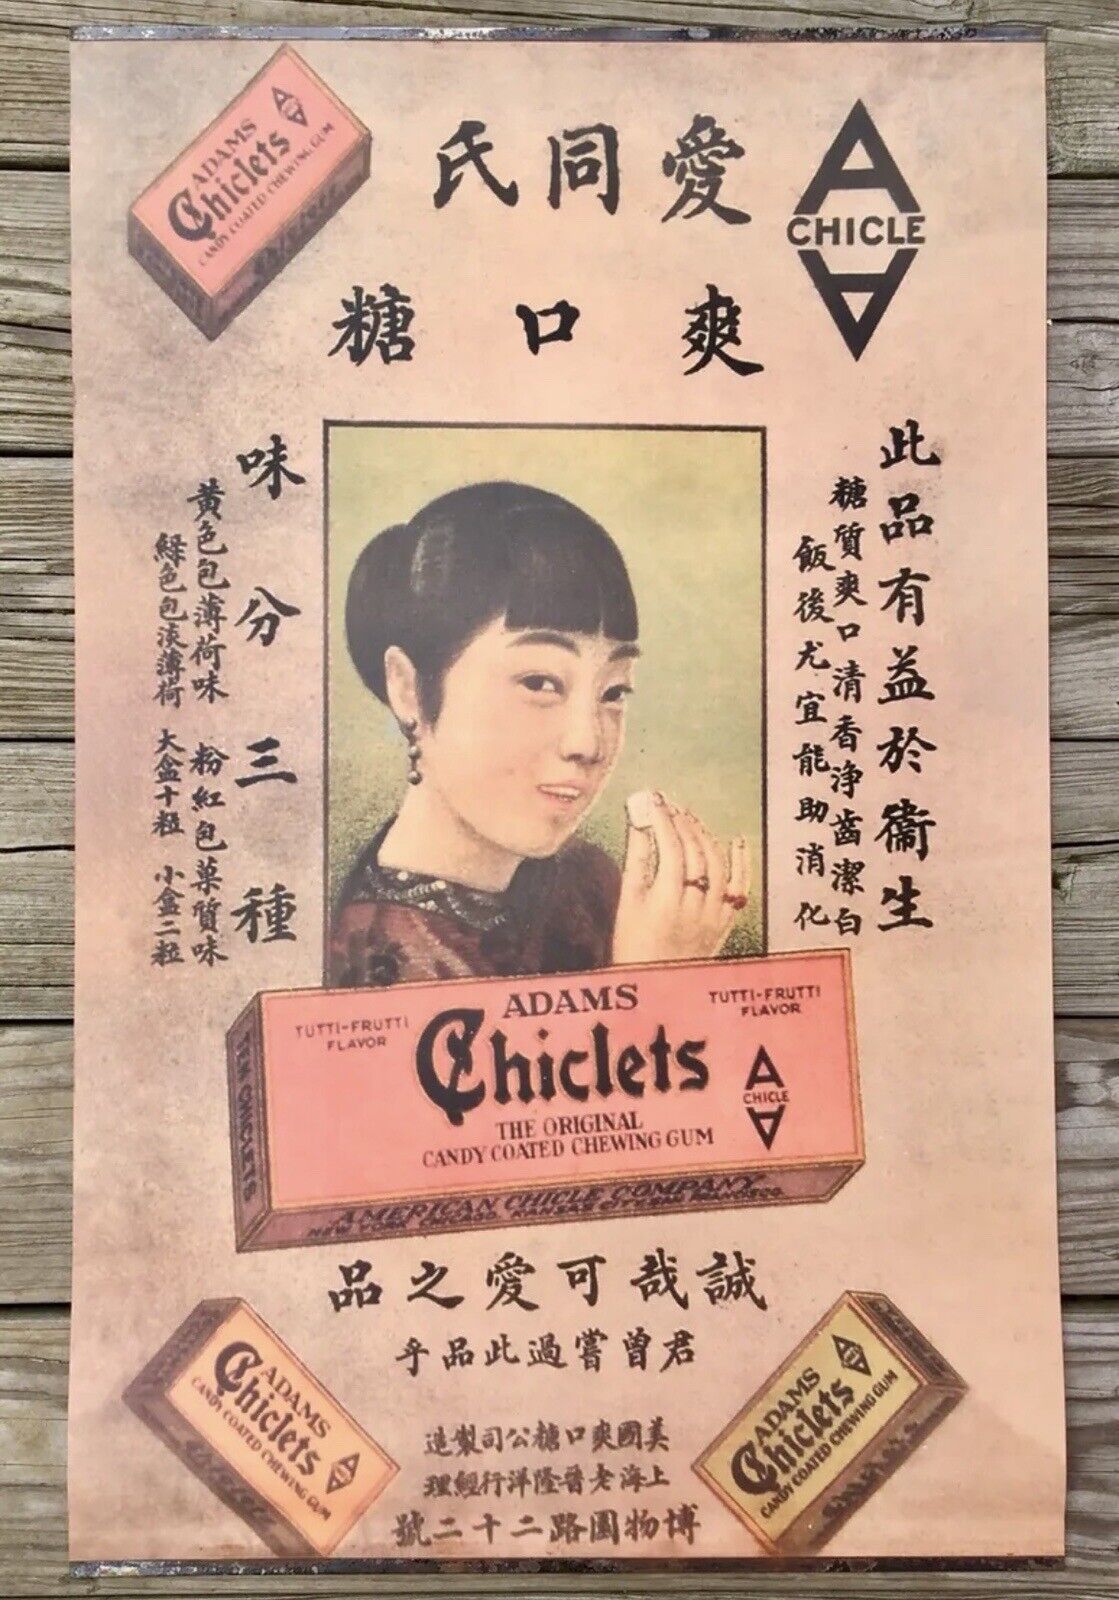 Chiclets Chewing Gum Vintage Chinese Advertising Poster, 31” x 19.5”